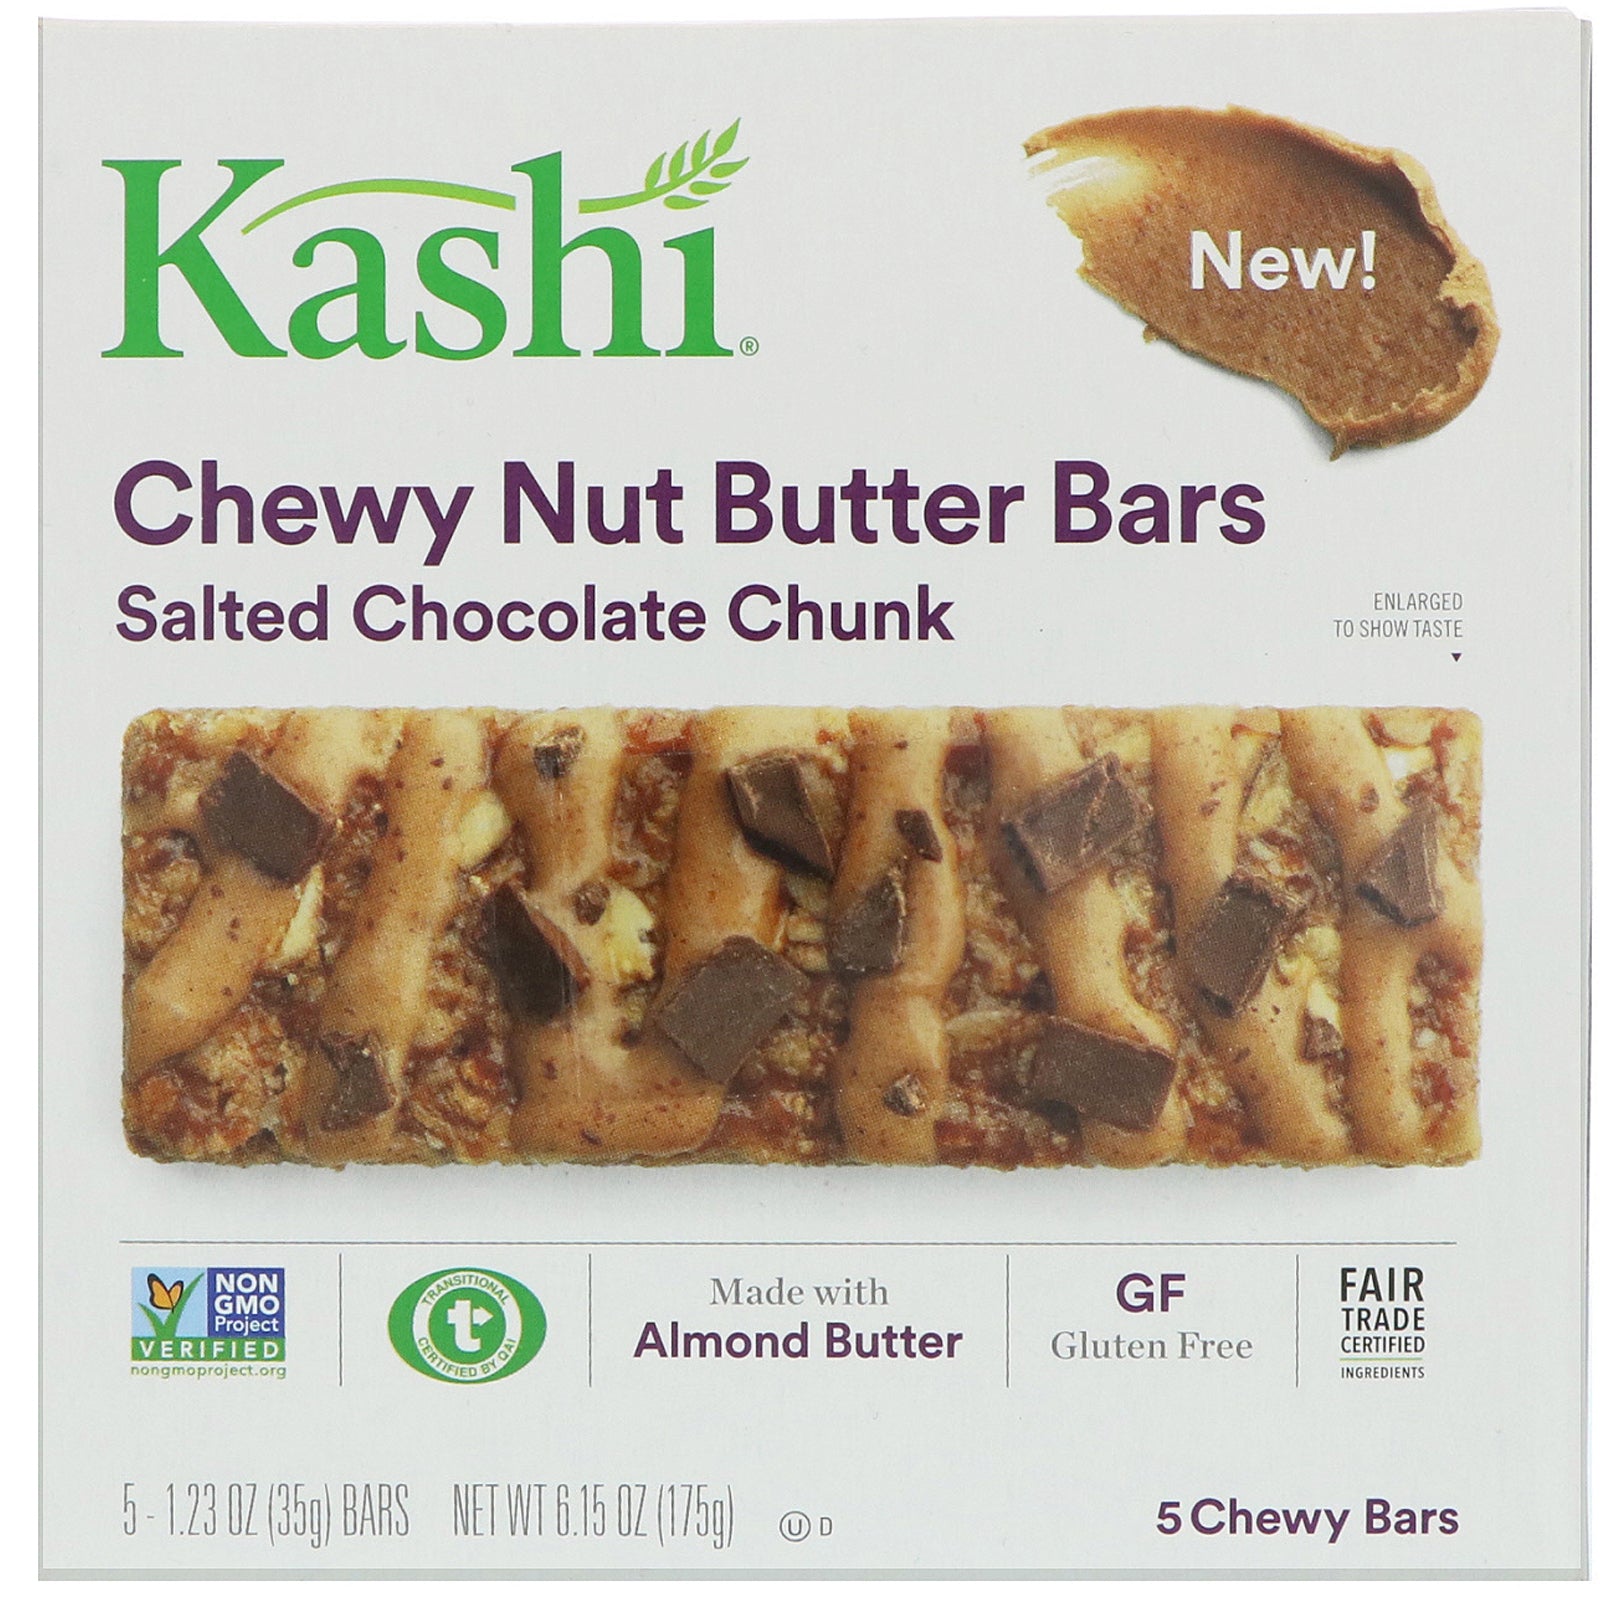 Kashi, Chewy Nut Butter Bars, Salted Chocolate Chunk, 5 Bars, 1.23 oz (35 g) Each